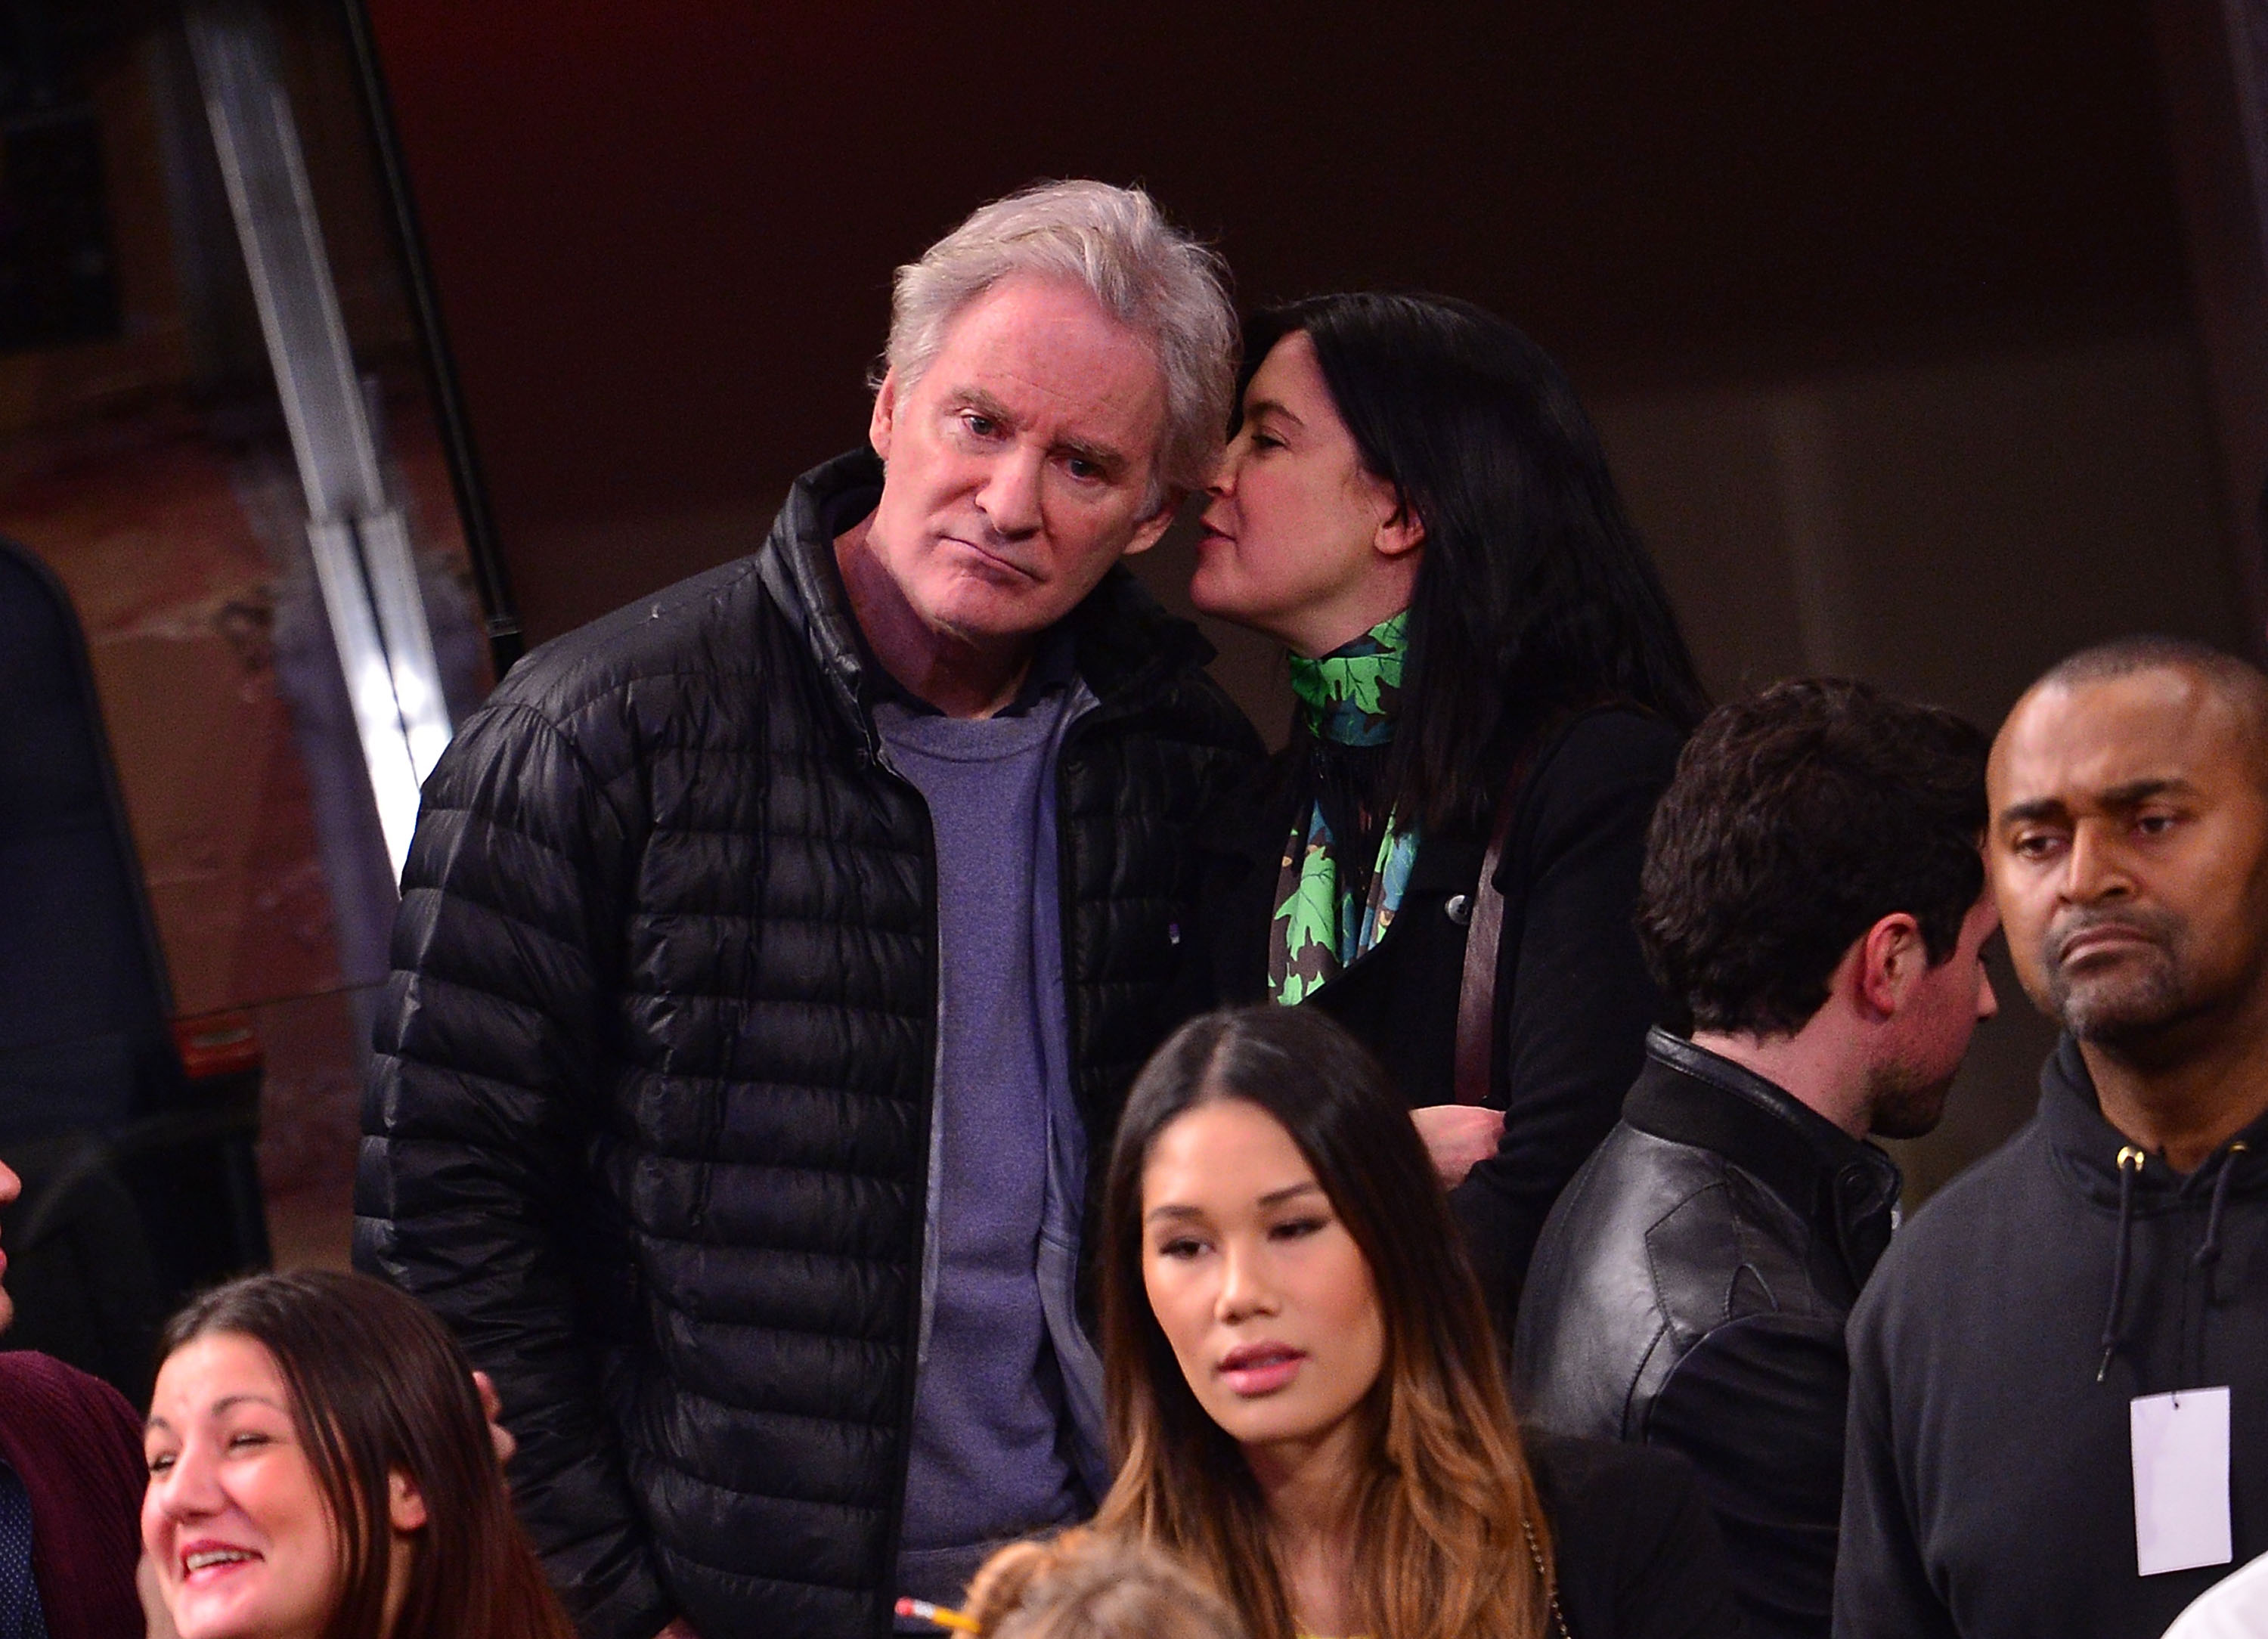 Kevin Kline and Phoebe Cates at Madison Square Garden on January 13, 2014 in New York City | Source: Getty Images